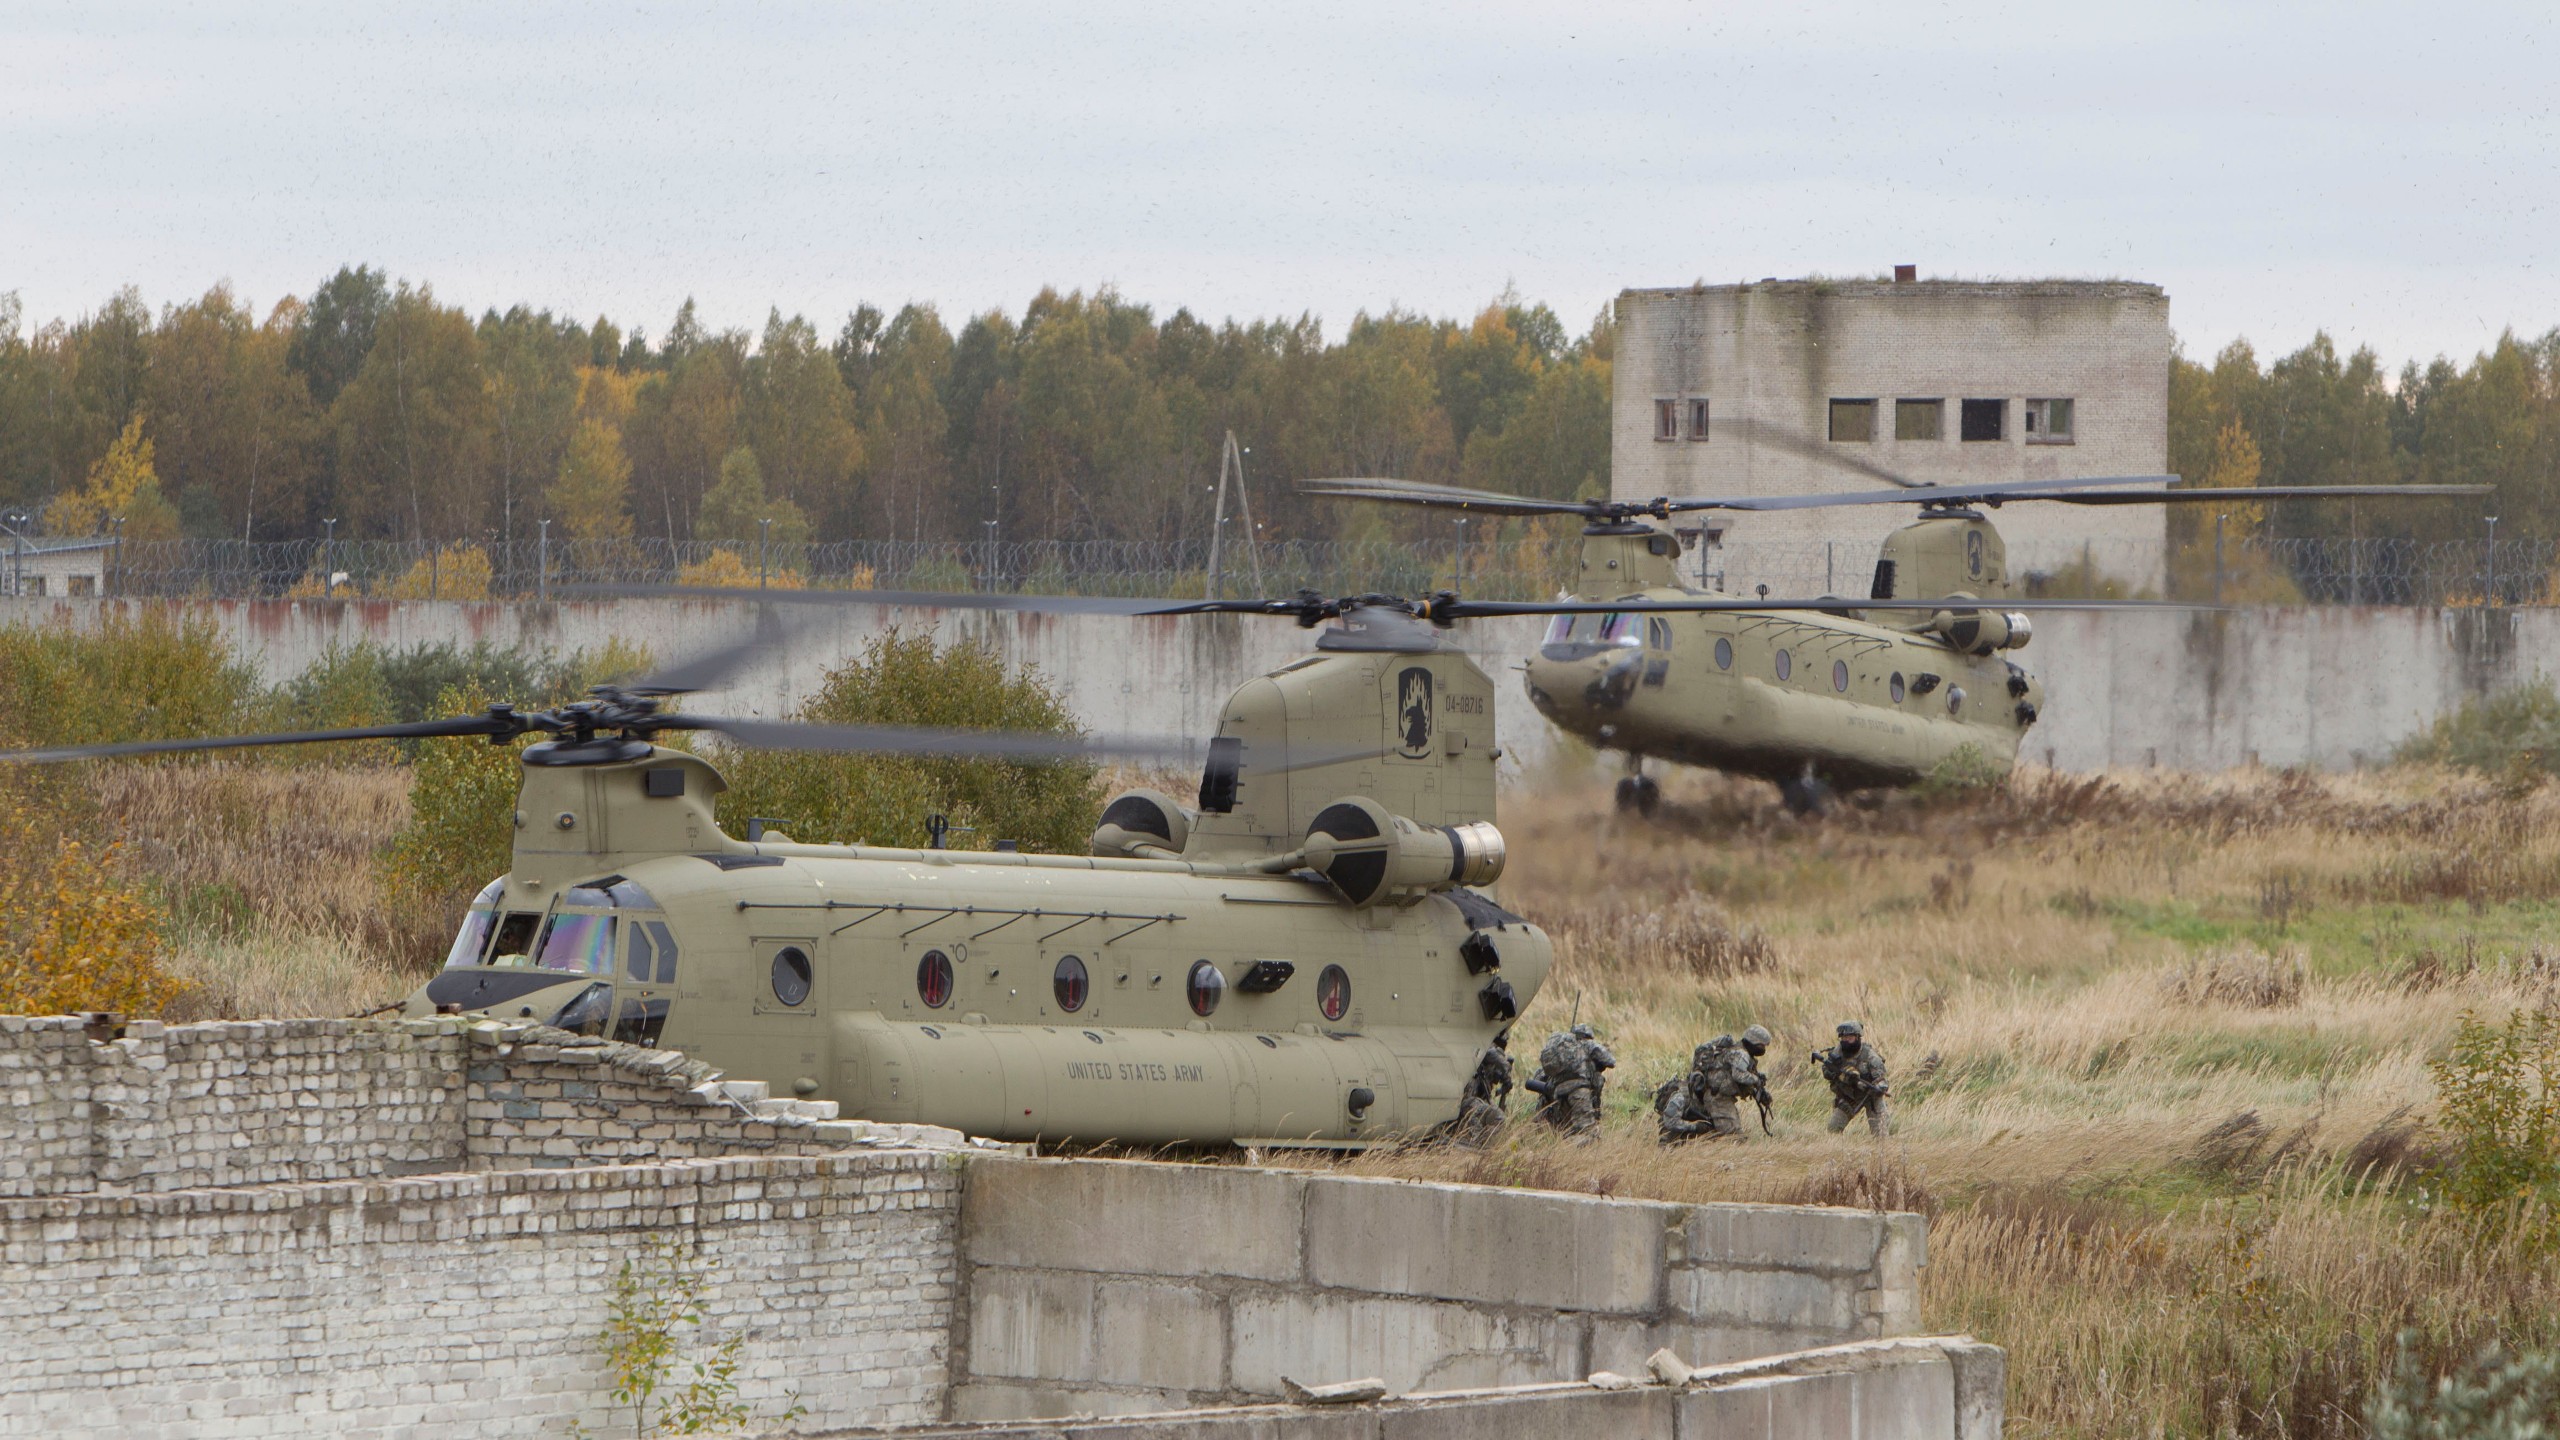 military, Helicopters, Soldier, Boeing CH 47 Chinook, United States Army, Military Aircraft, Estonia, Prison Wallpaper